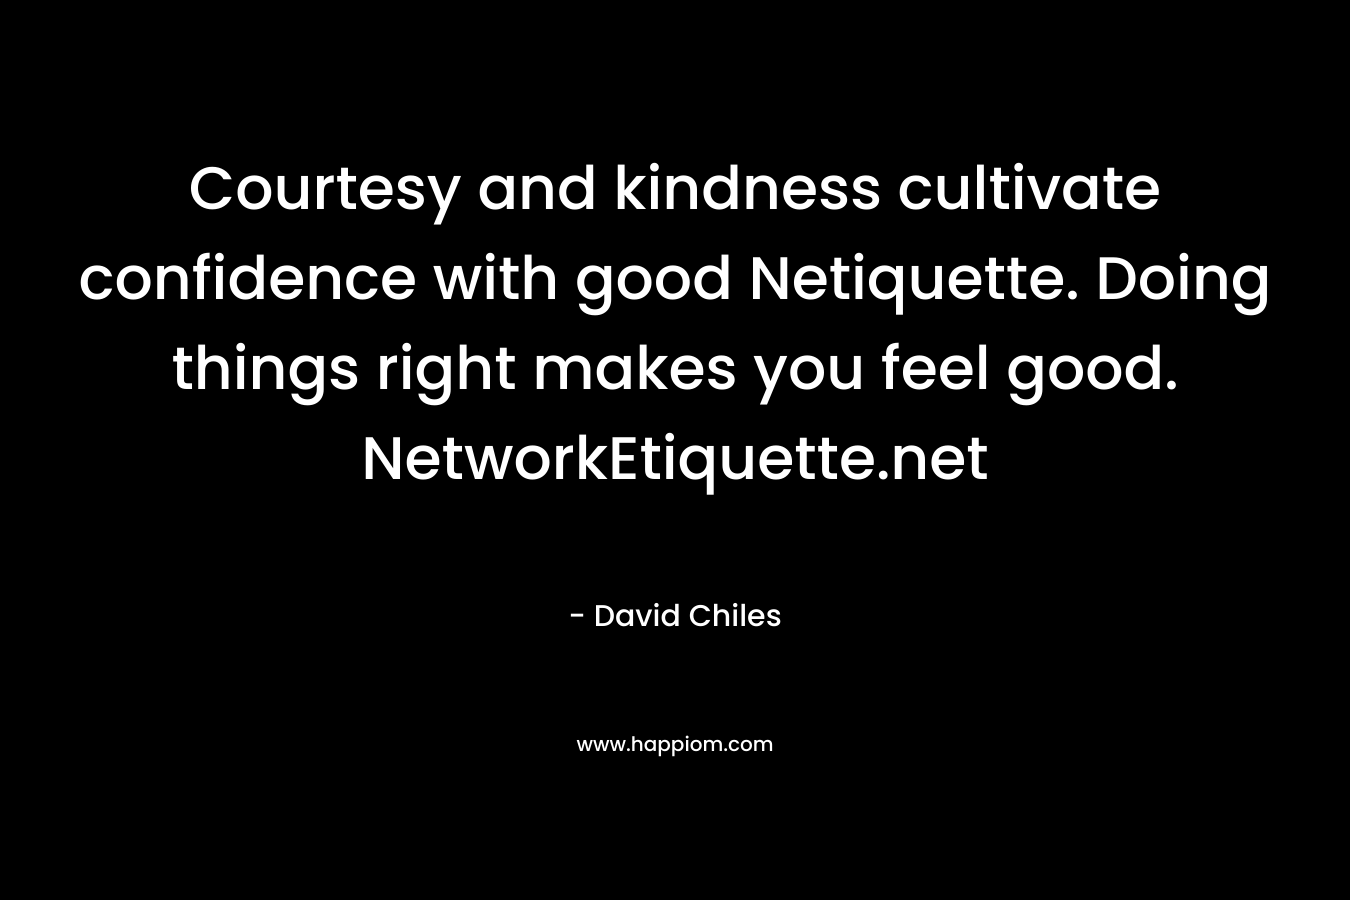 Courtesy and kindness cultivate confidence with good Netiquette. Doing things right makes you feel good. NetworkEtiquette.net